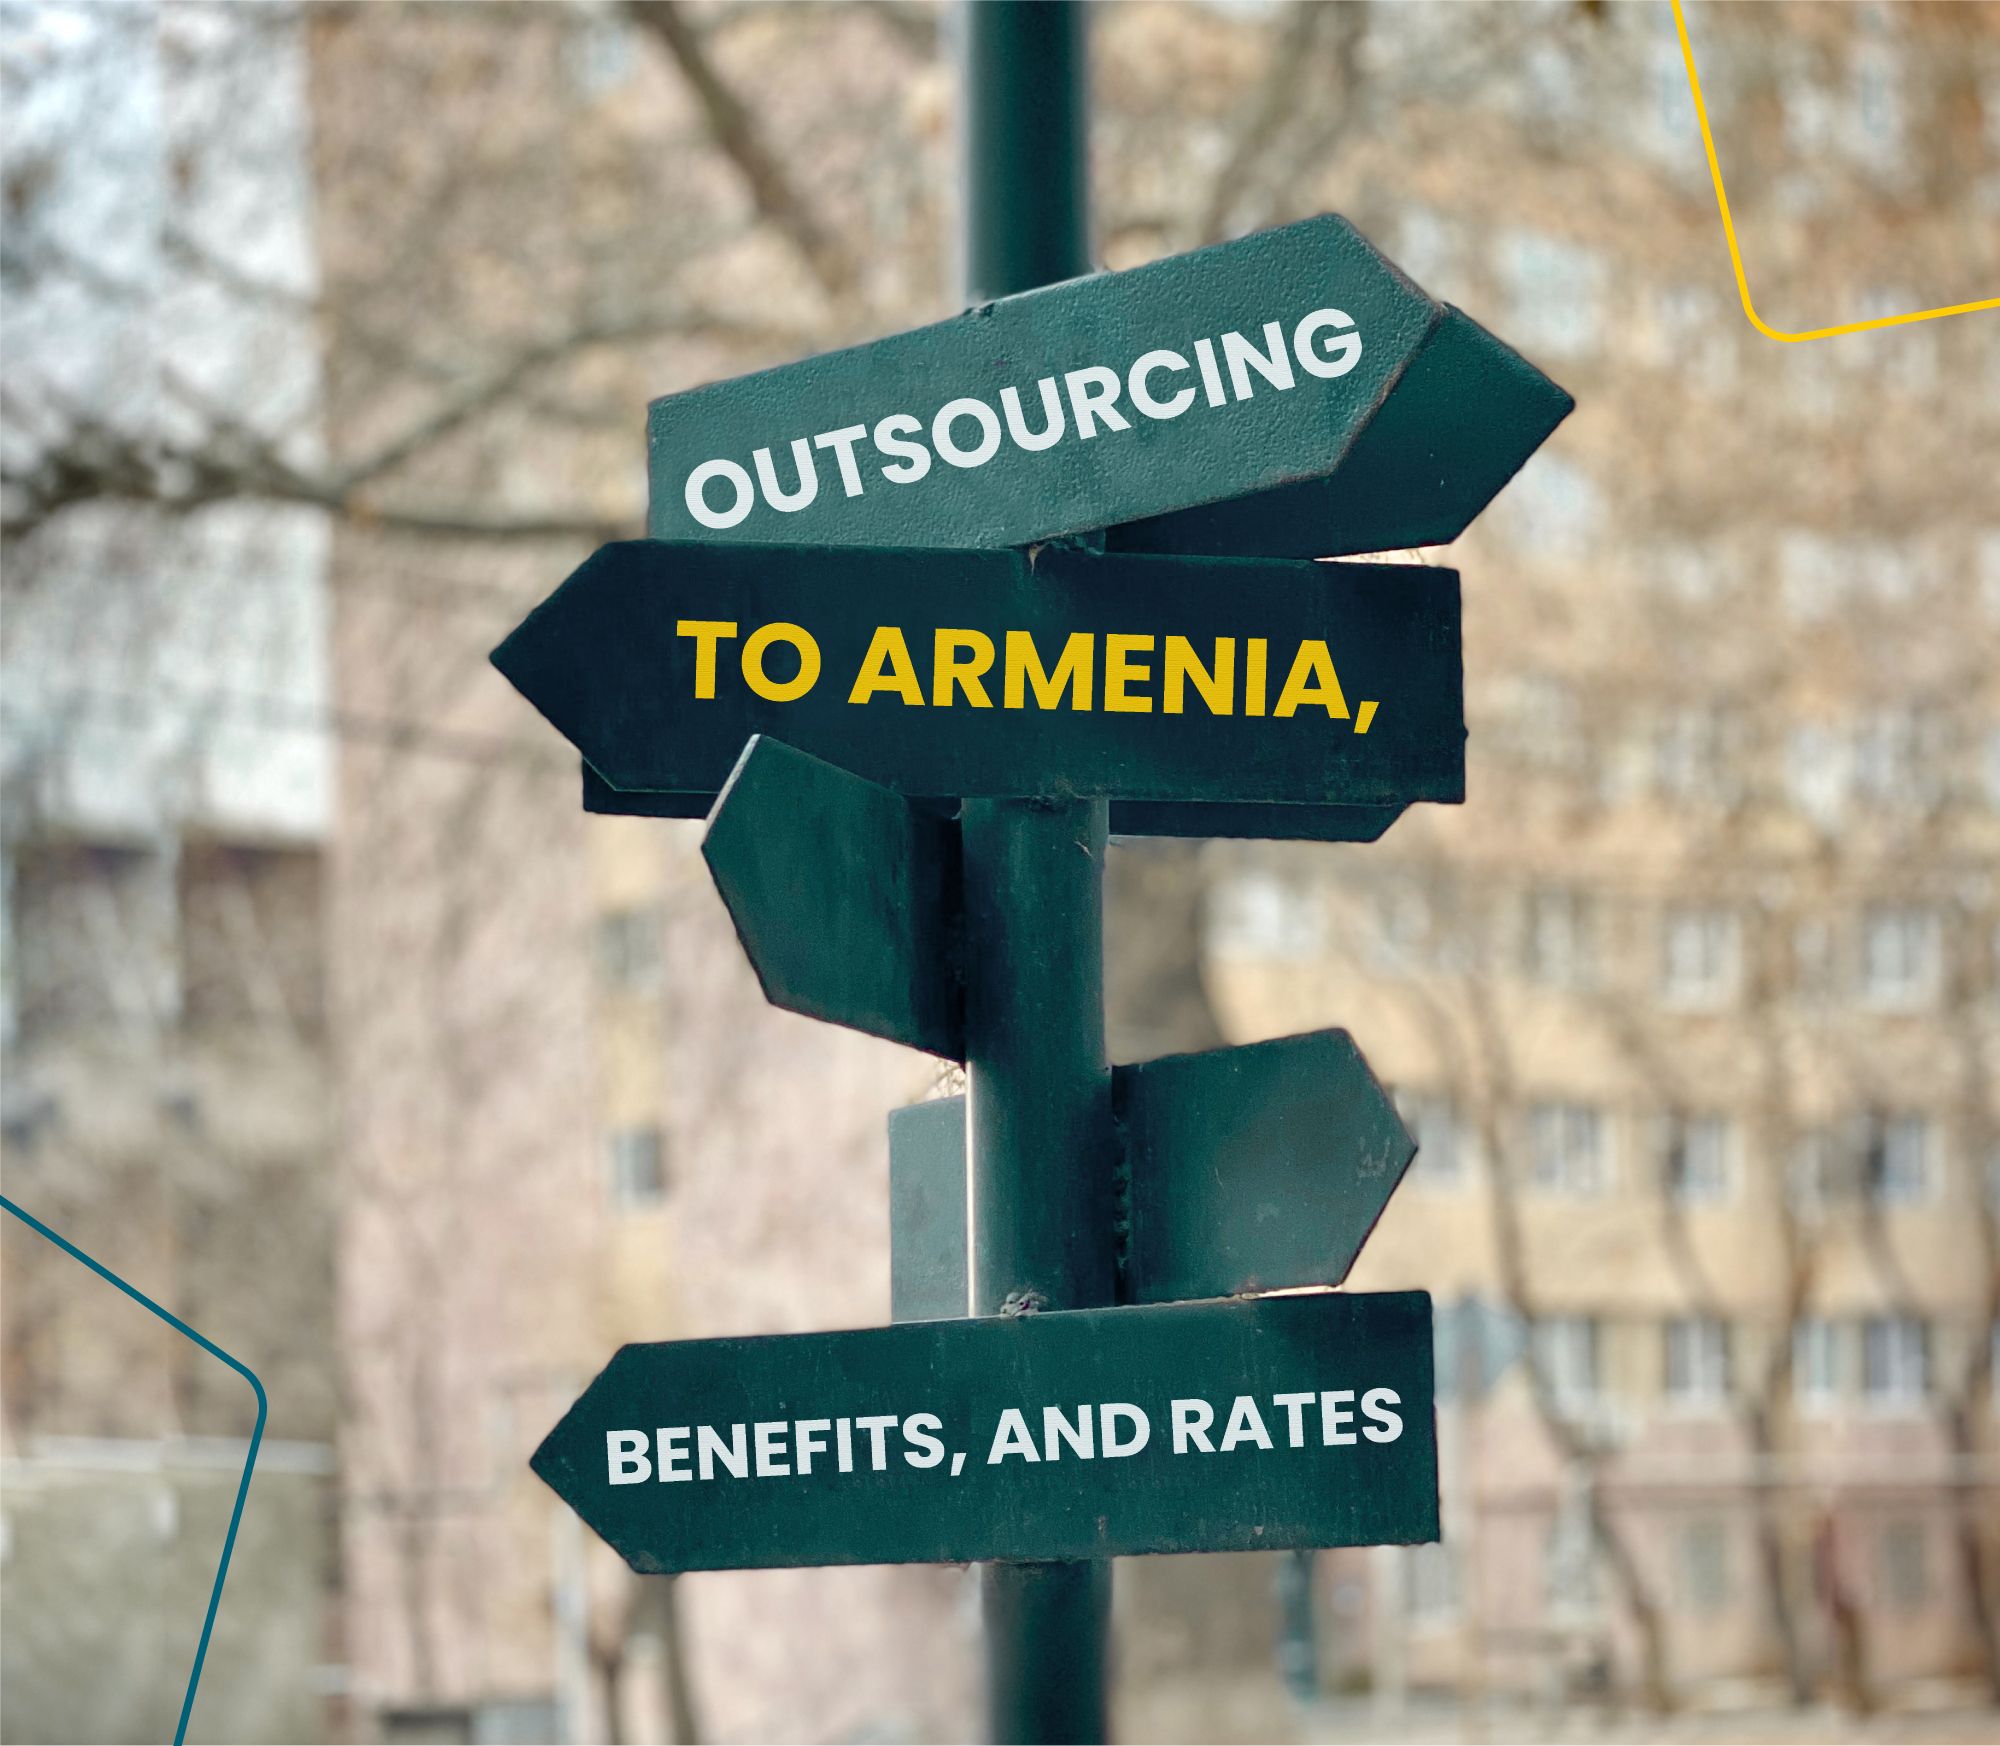 Outsourcing to Armenia, benefits, and rates